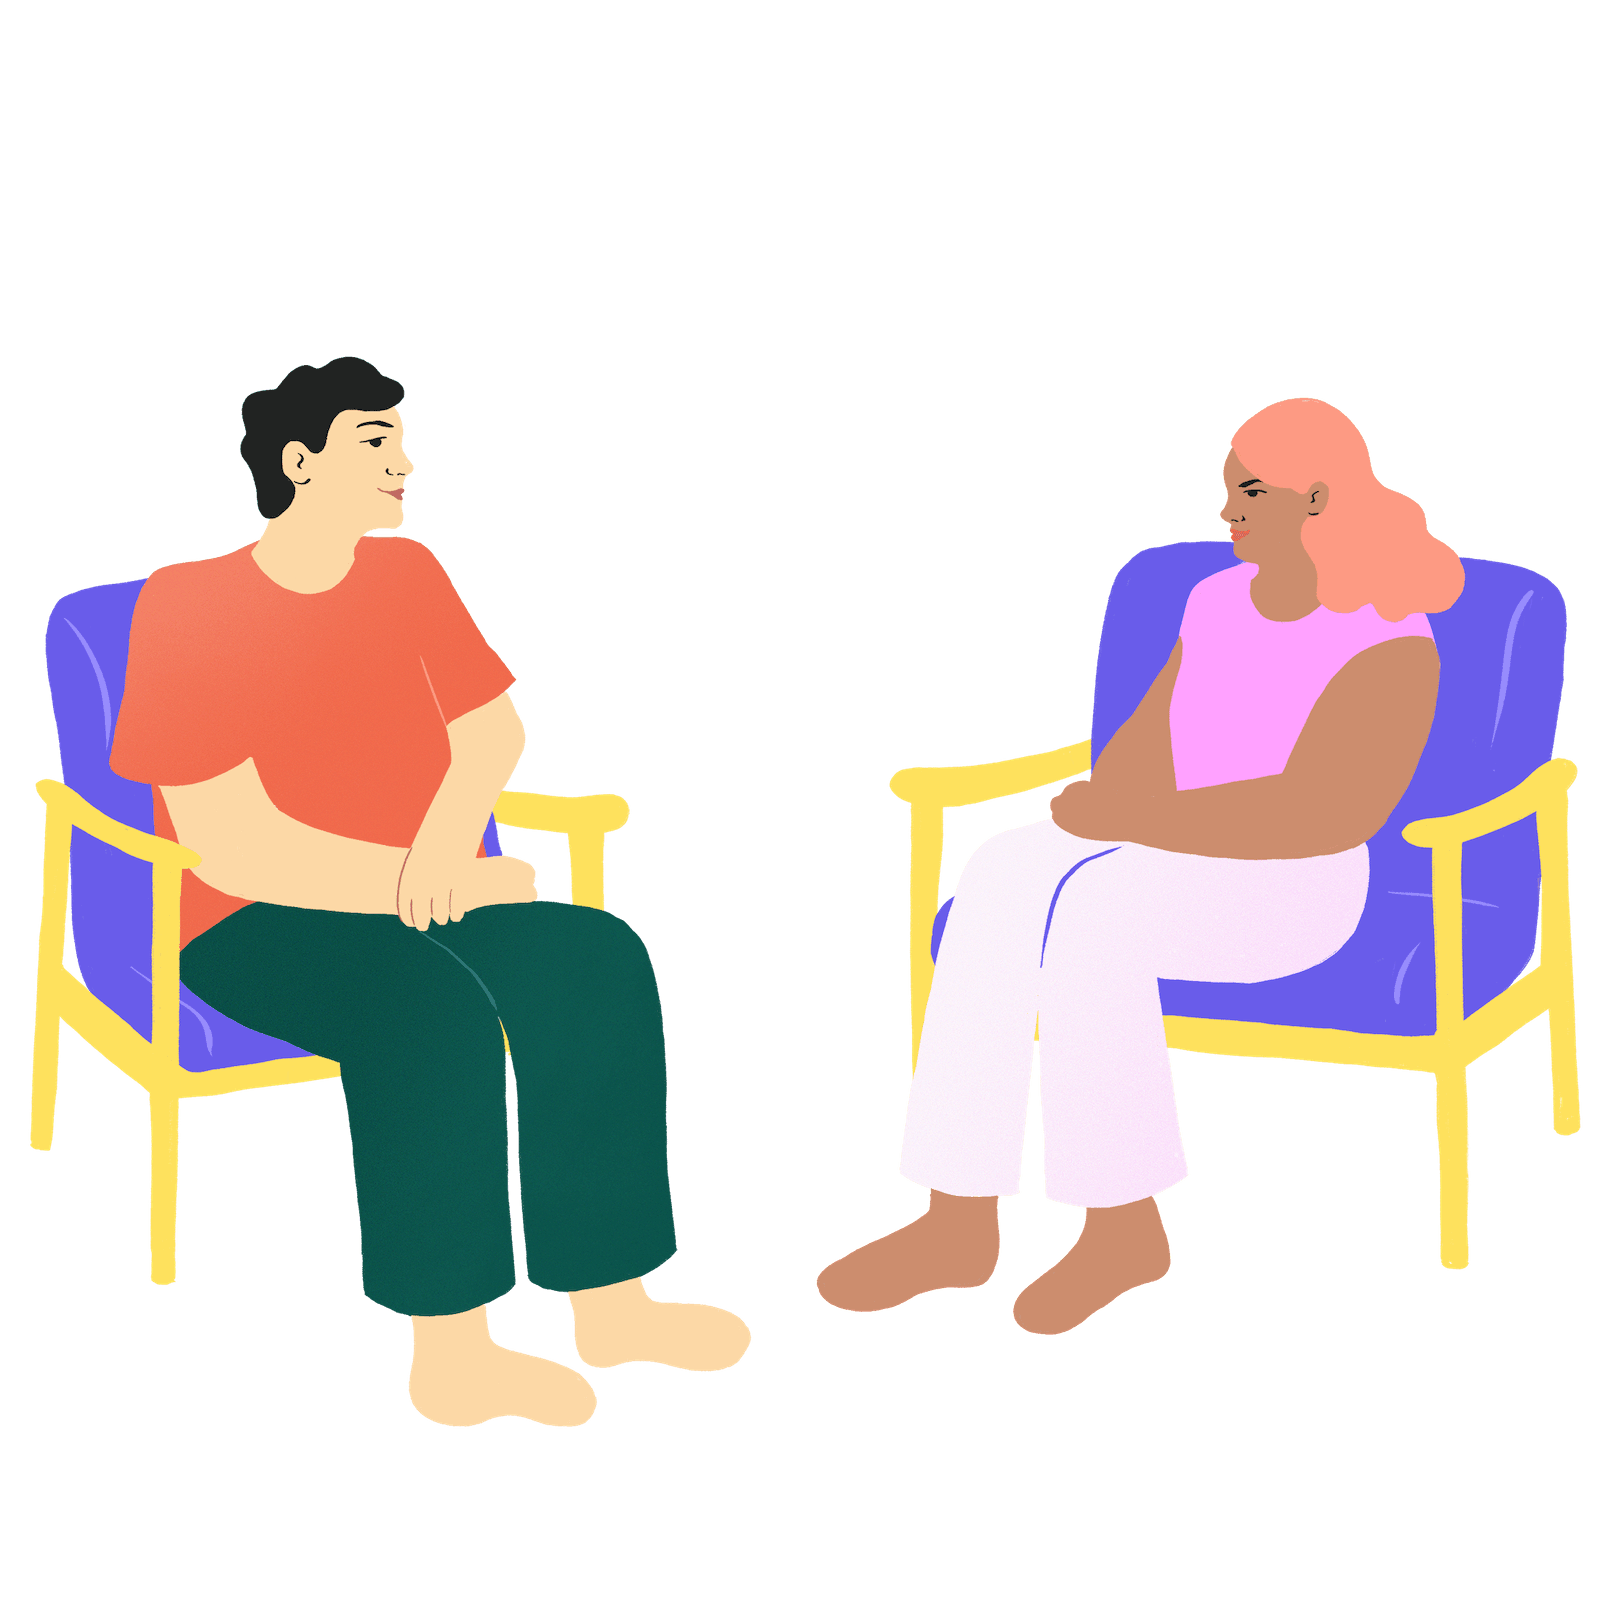 An illustration of client and therapist communicating empathically